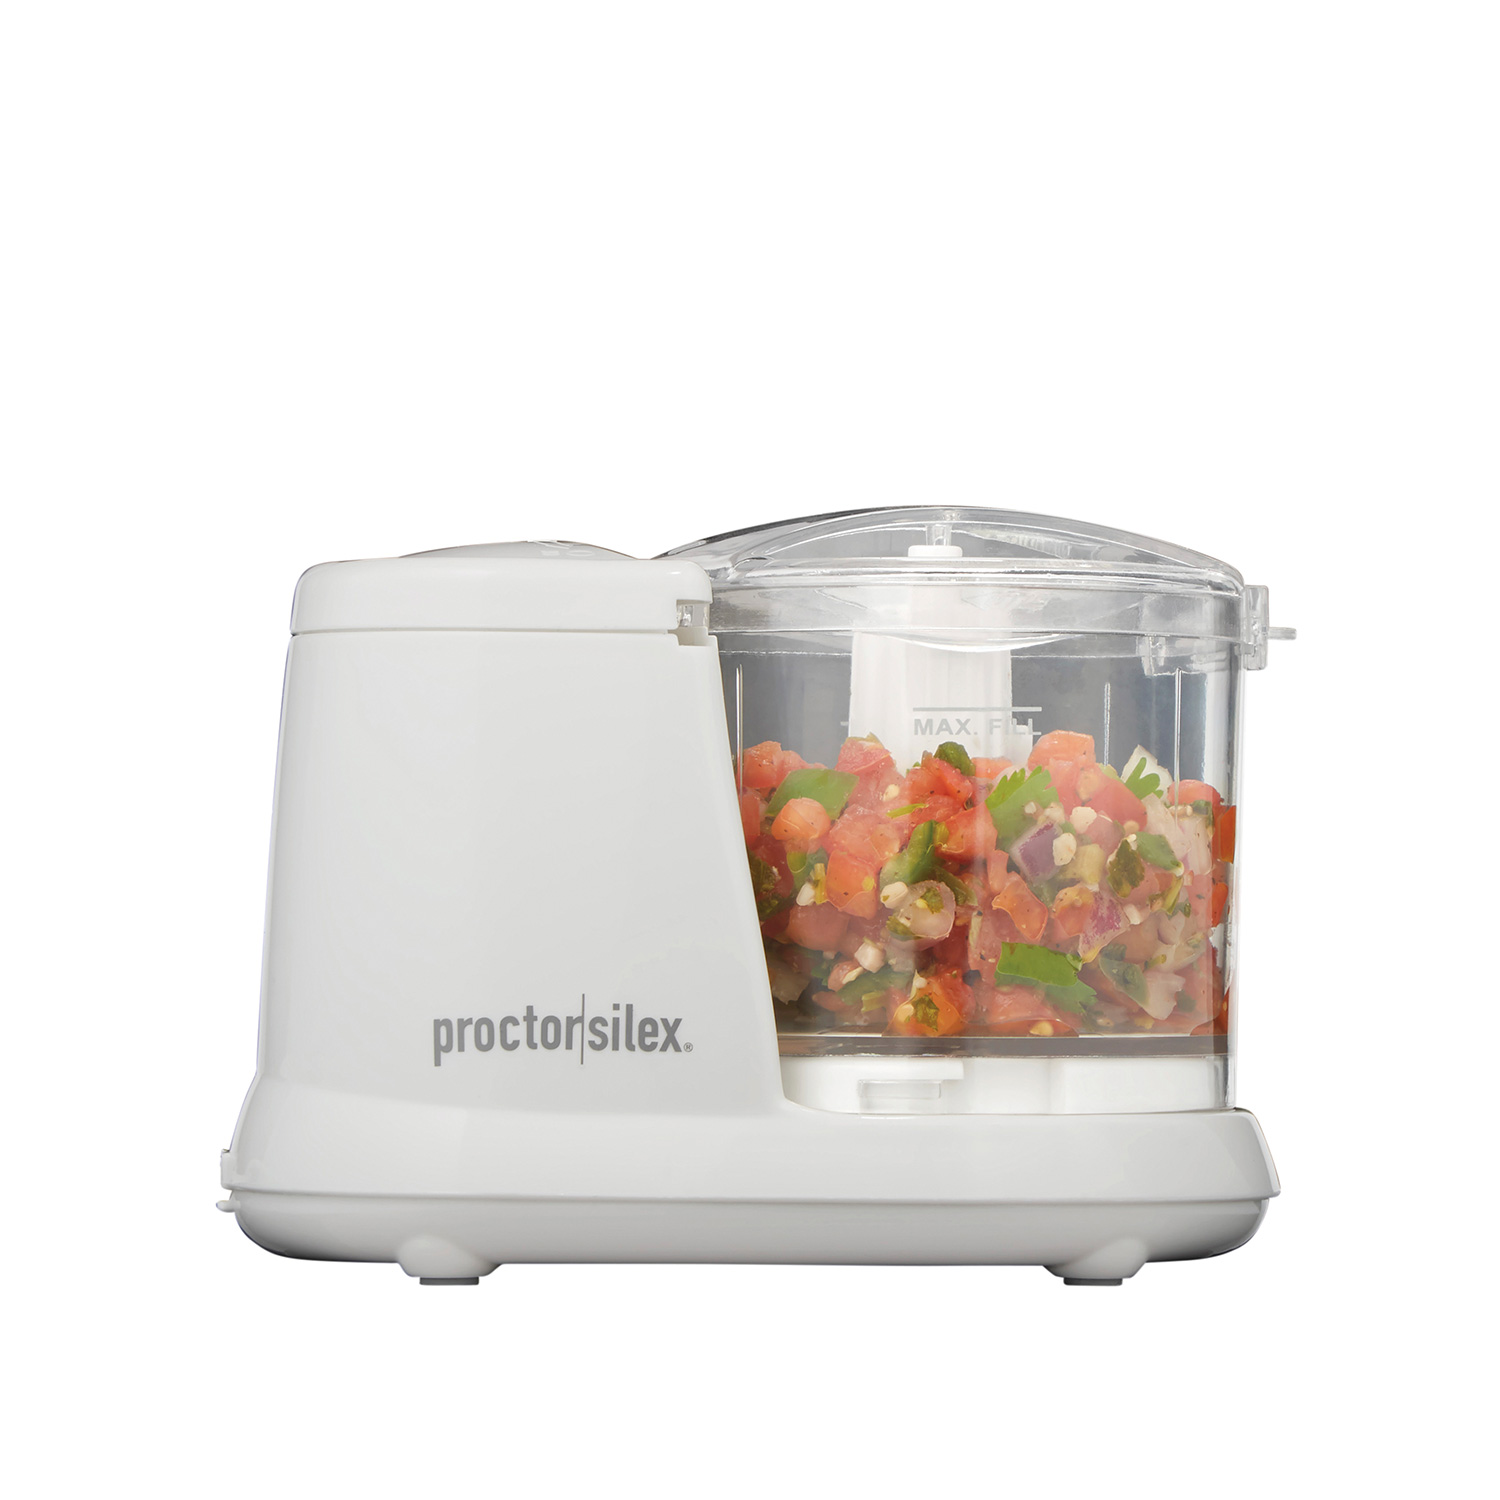 1.5 Cup Food Chopper, White - 72500PS Small Size